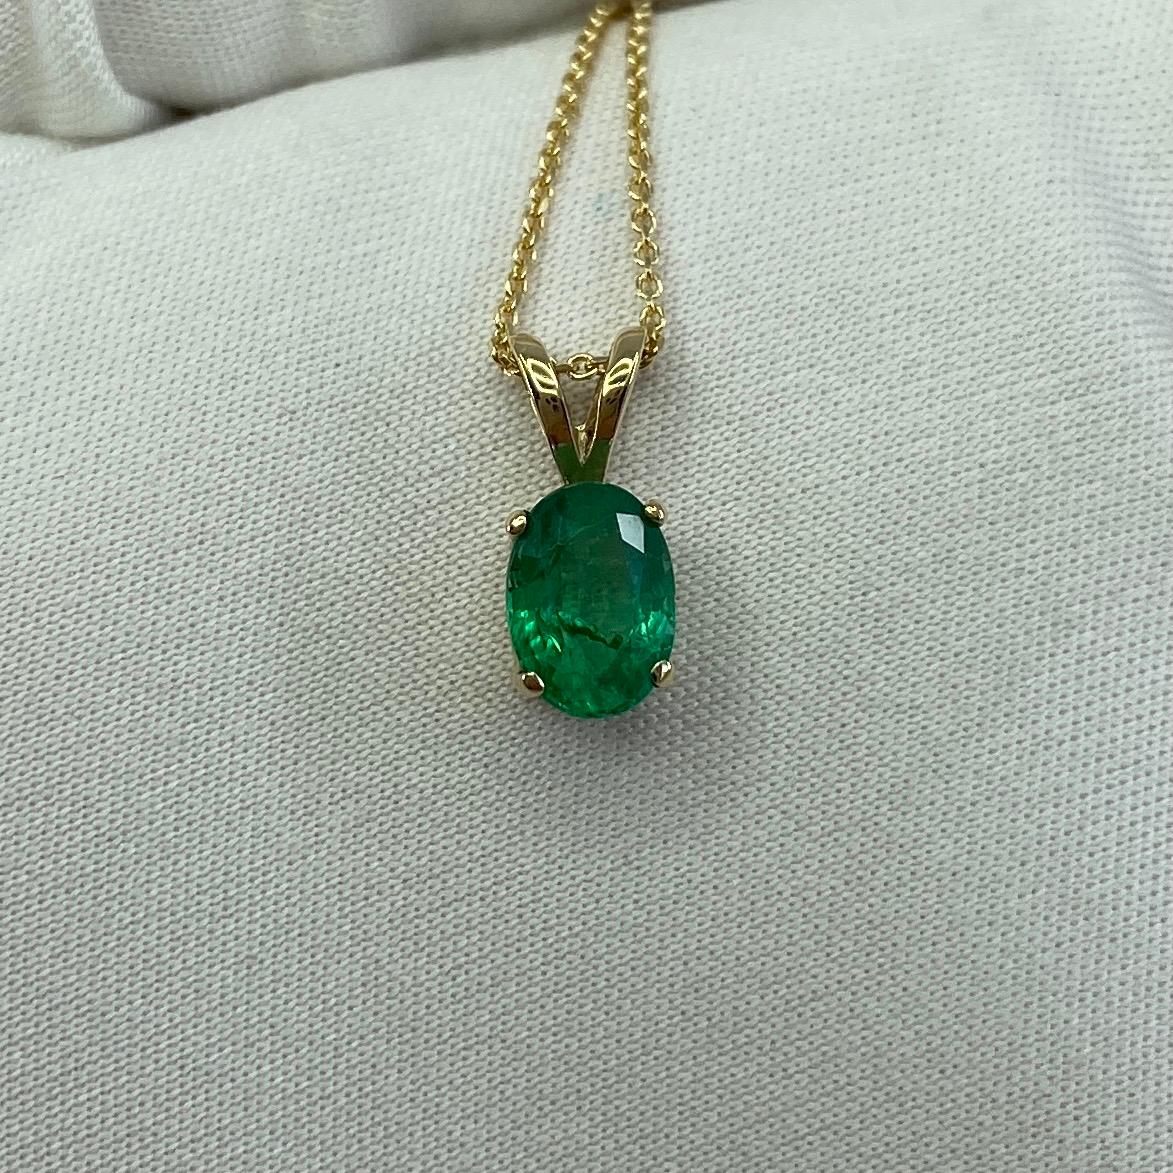 Women's or Men's 0.85 Carat Vivid Green Emerald Oval Cut Yellow Gold Solitaire Pendant Necklace